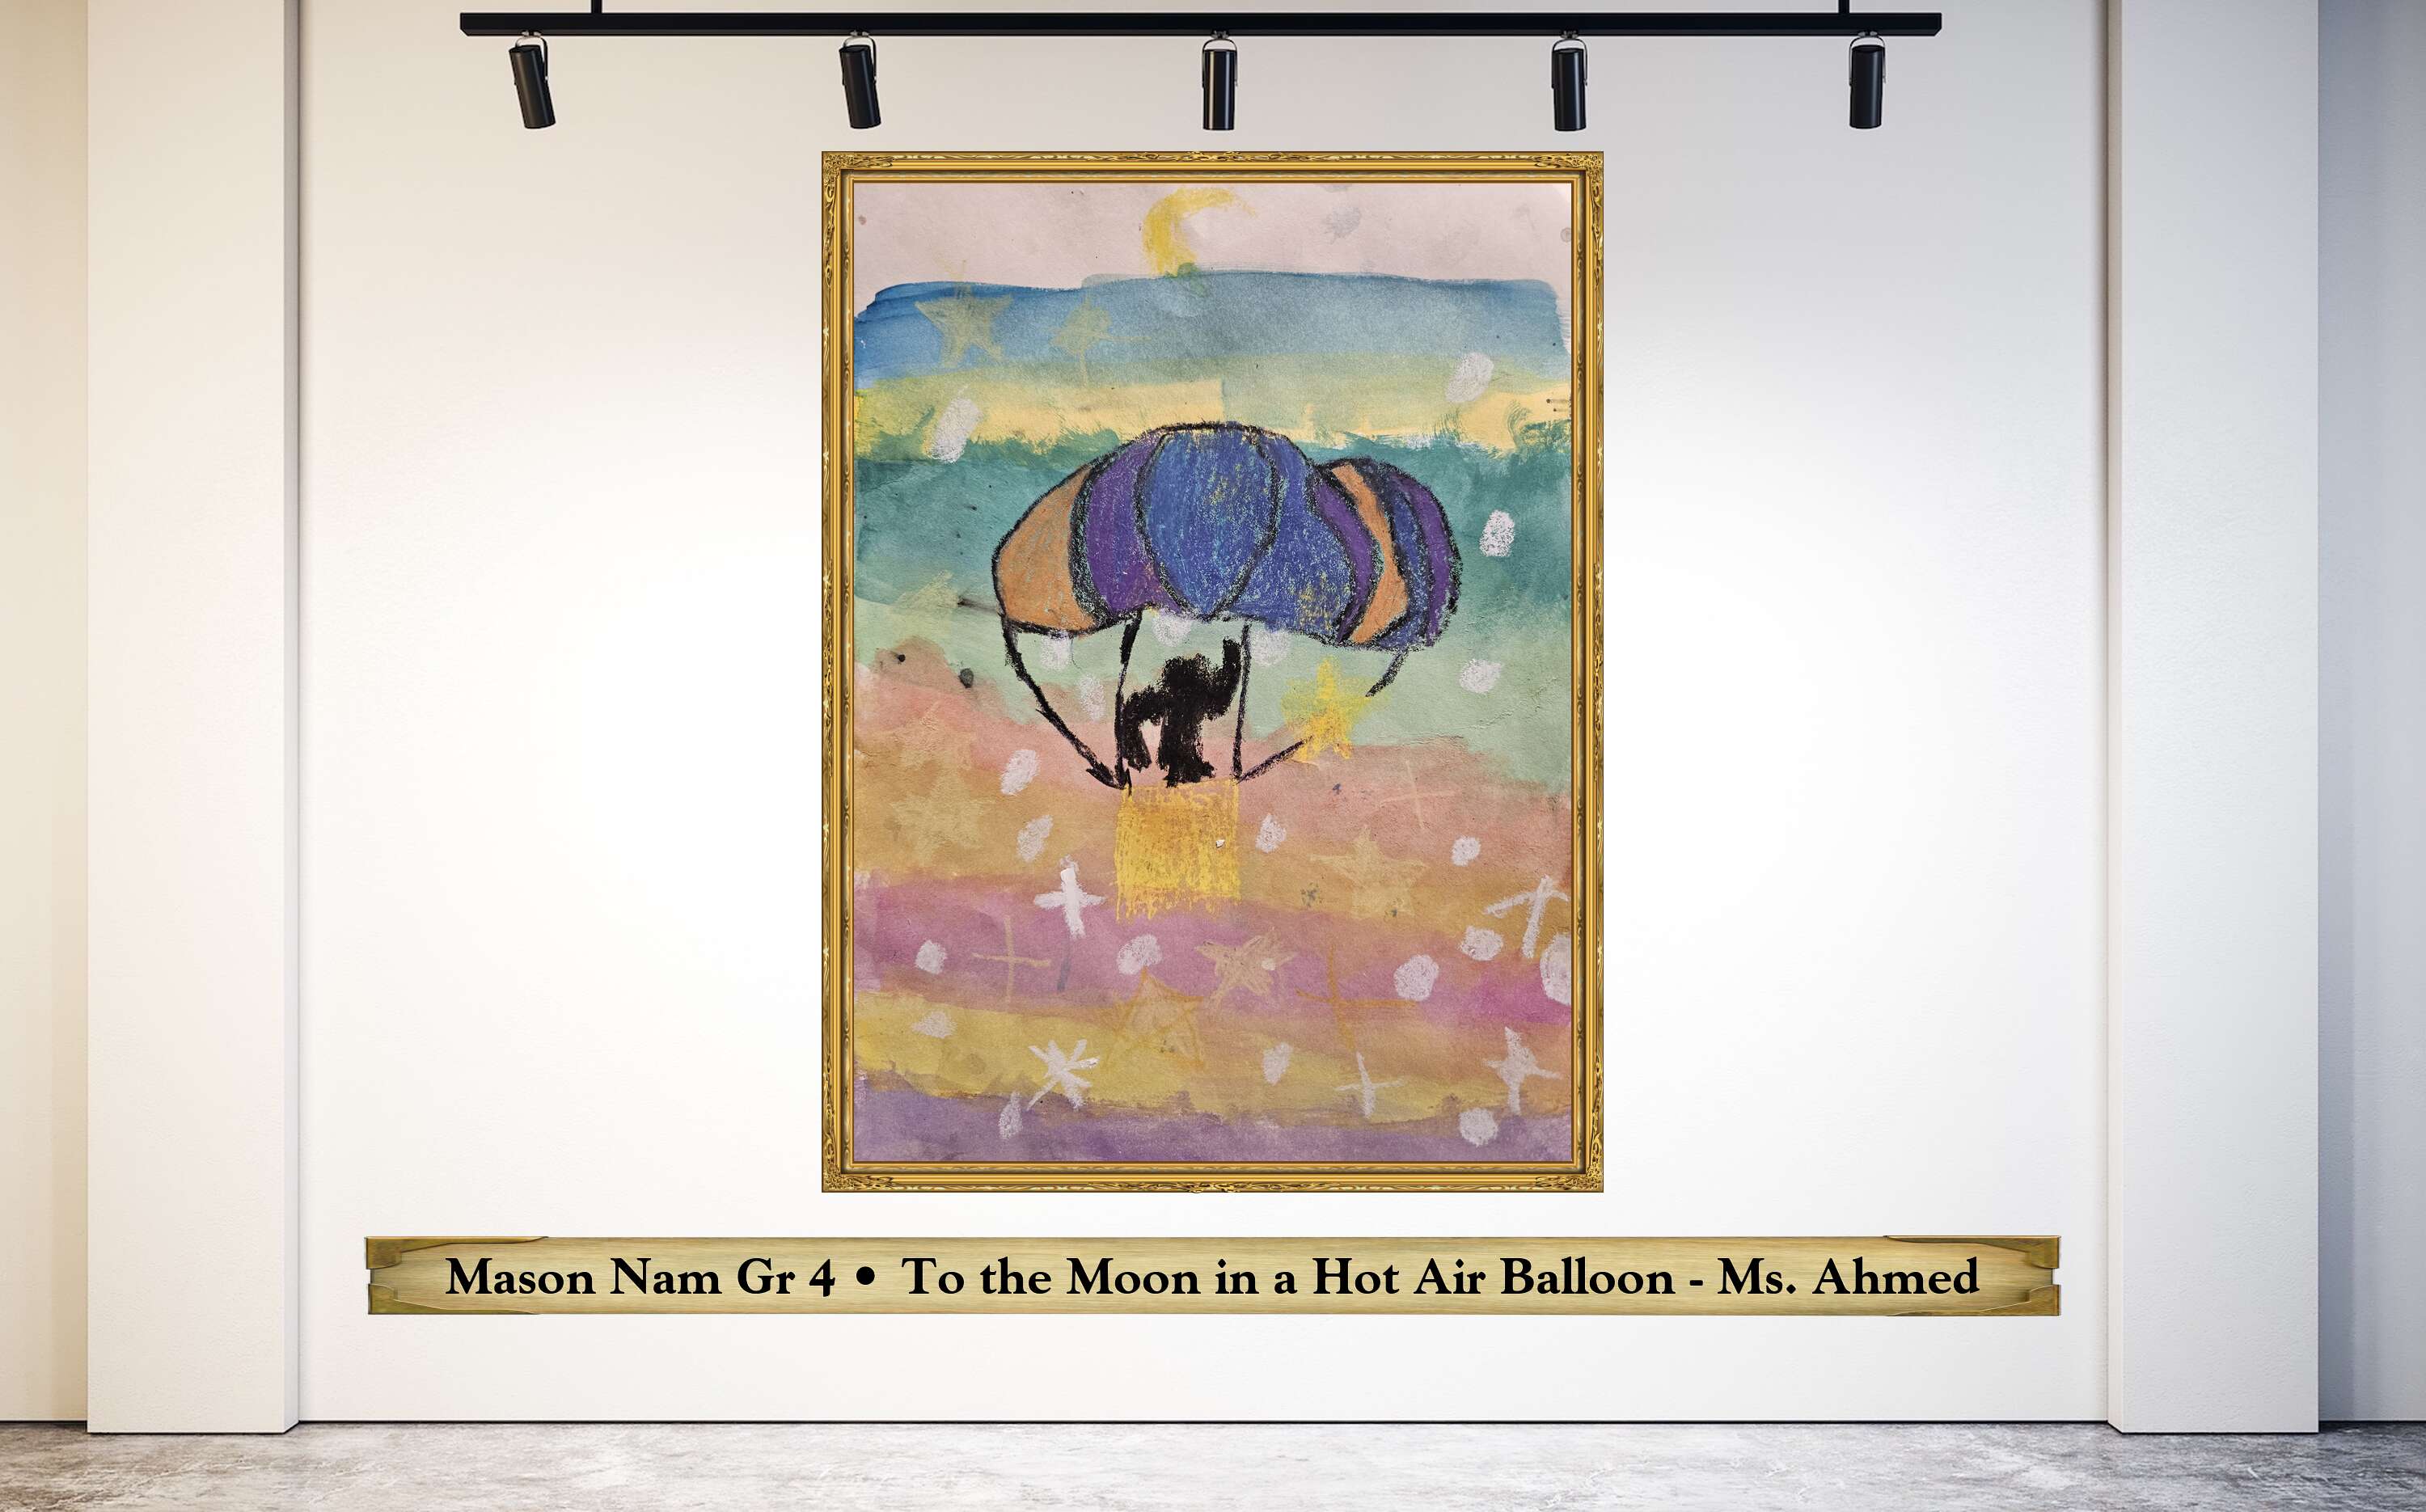 Mason Nam Gr 4 • To the Moon in a Hot Air Balloon - Ms. Ahmed